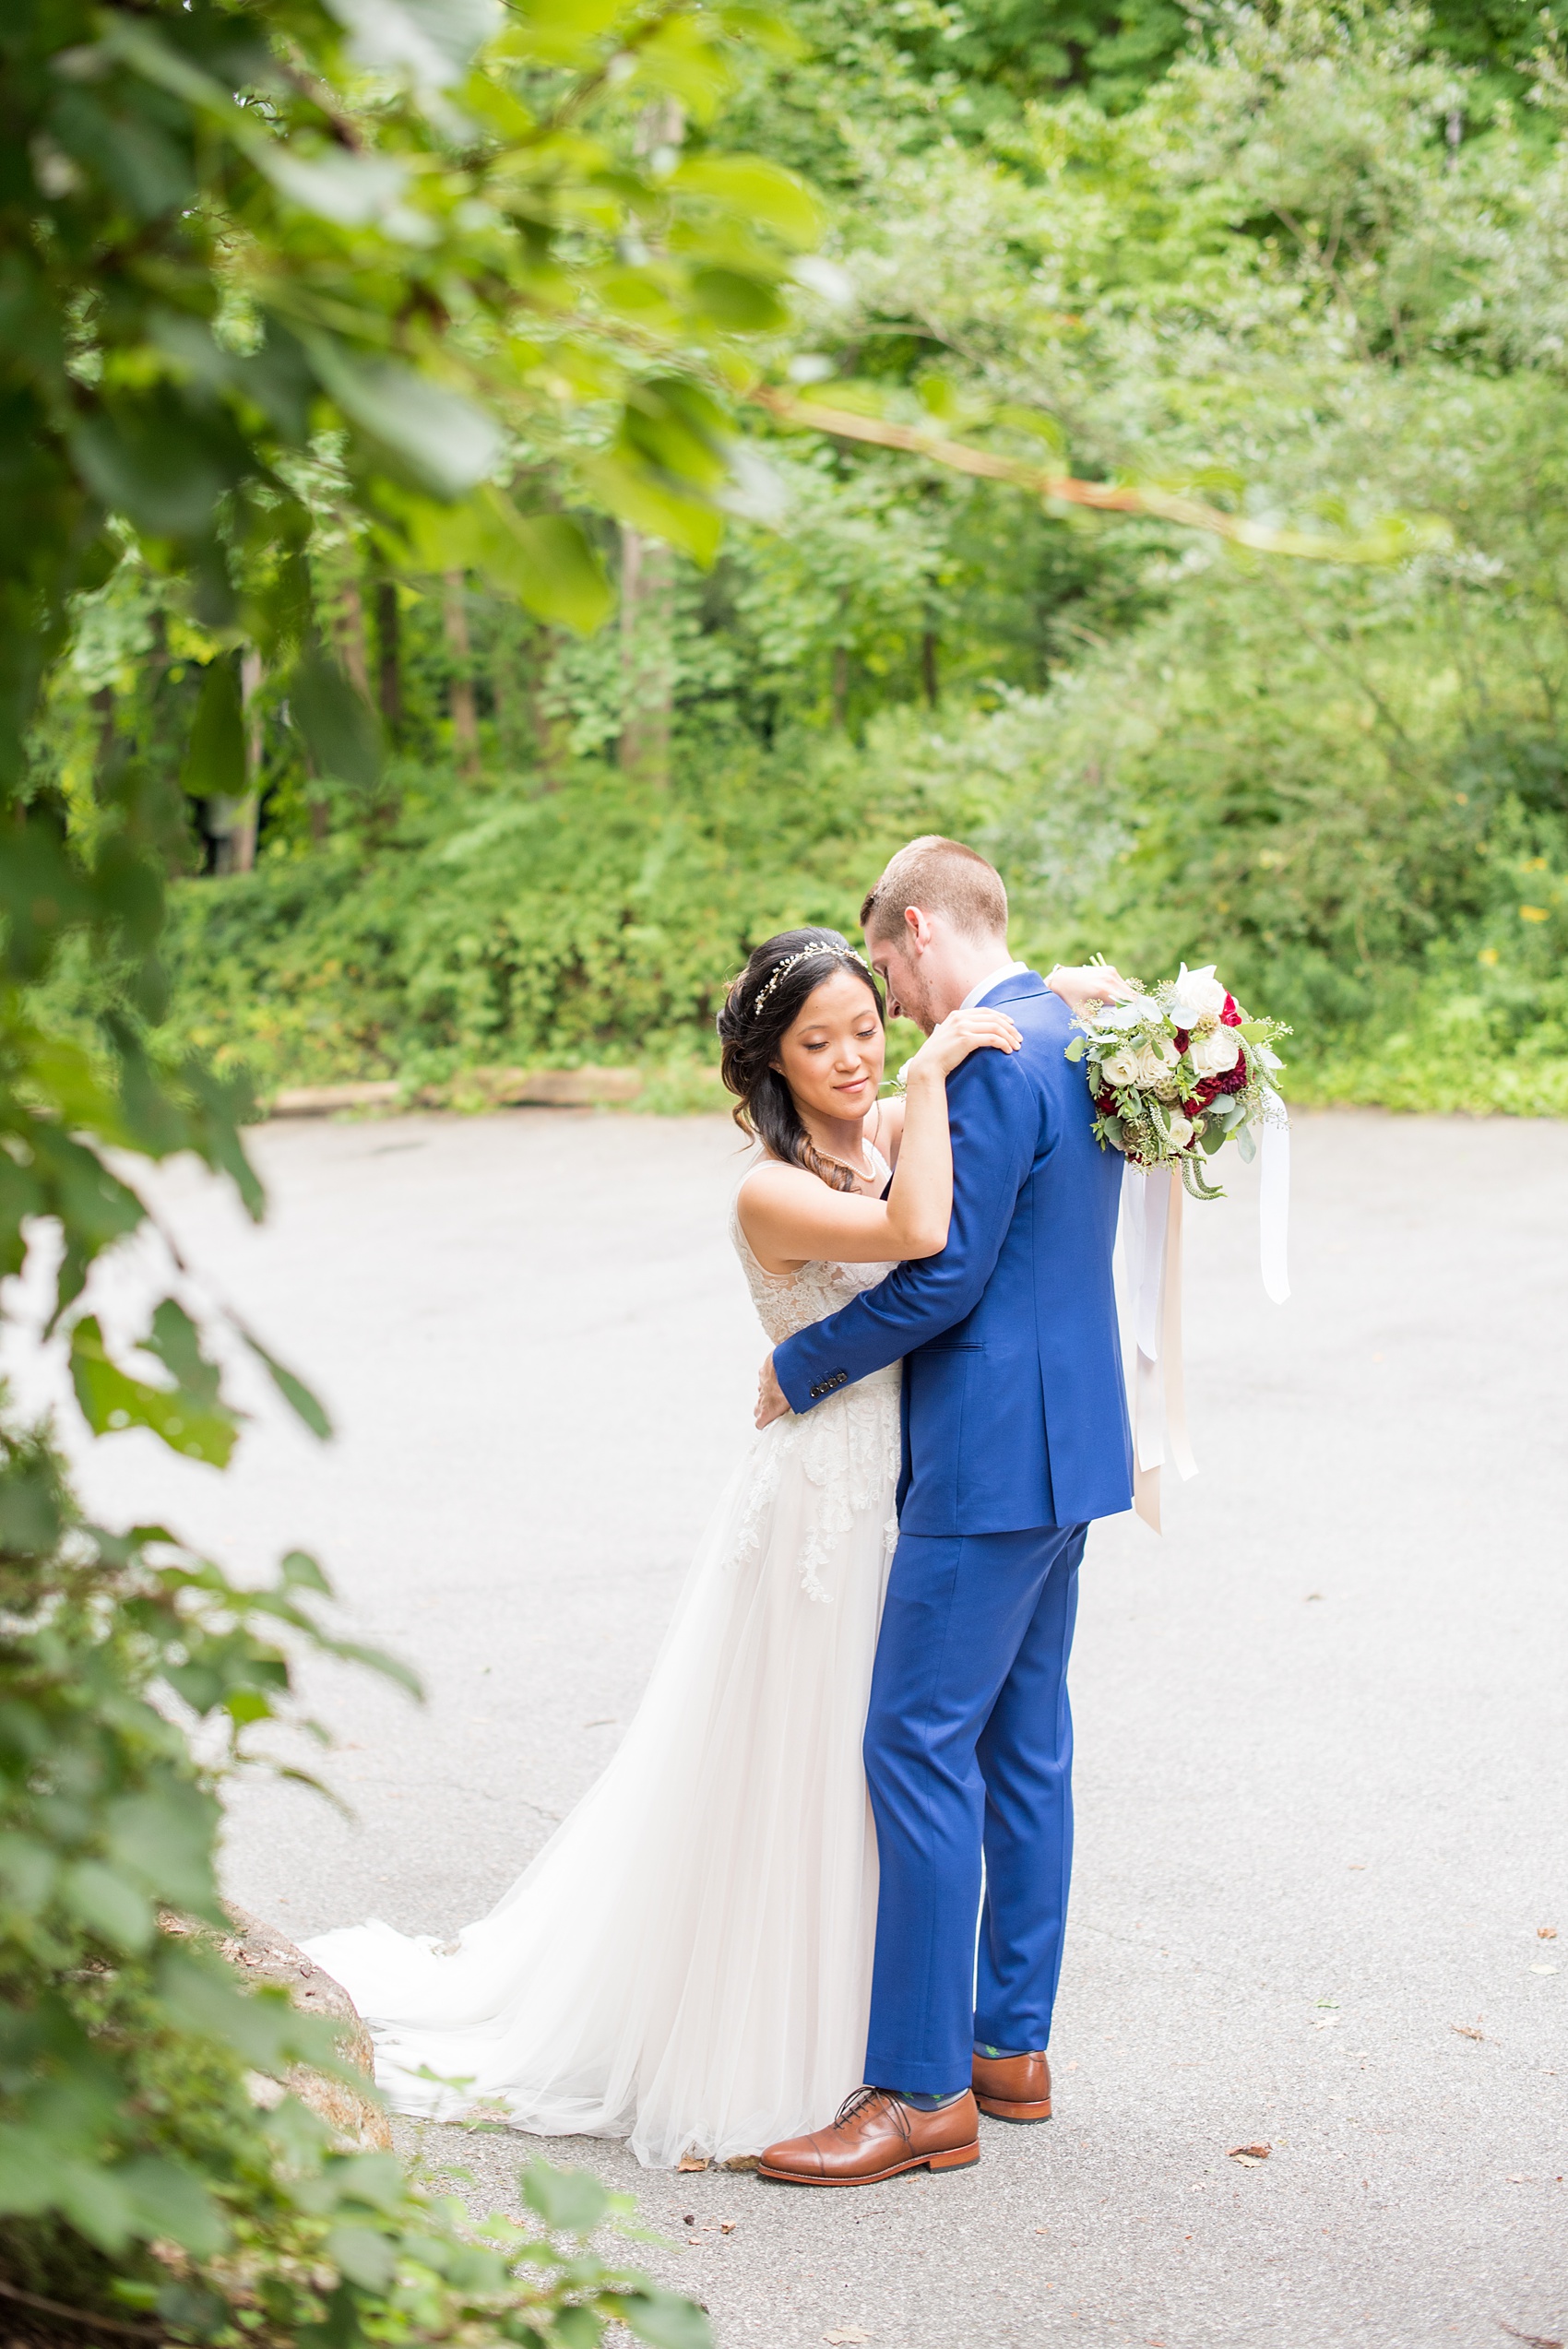 Wedding photos at Crabtree's Kittle House in Chappaqua, New York by Mikkel Paige Photography. This venue in Westchester county has the perfect elegance of a rustic elegant home and garden feel very close to NYC. The bride wore a gown from BHLDN and groom a custom blue Indochino suit. #bluesuit #BHLDNgown #mikkelpaige #CrabtreesKittleHouse #WestchesterWeddingVenues #WestchesterWedding #AsianBride #summerwedding 